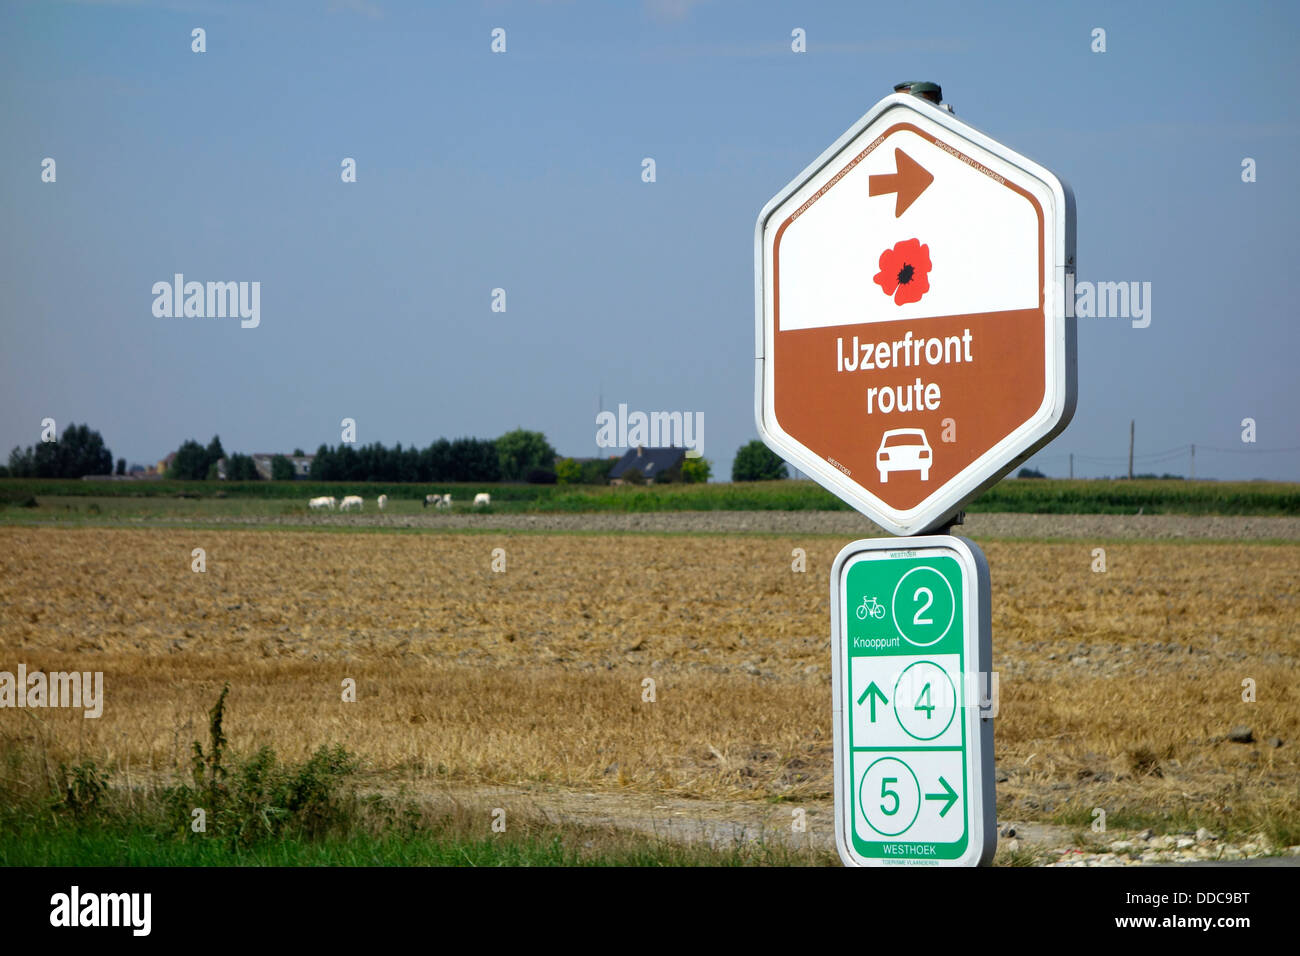 Signpost for First World War One IJzerfrontroute / Yser front battlefields car route and cycling tours, West Flanders, Belgium Stock Photo